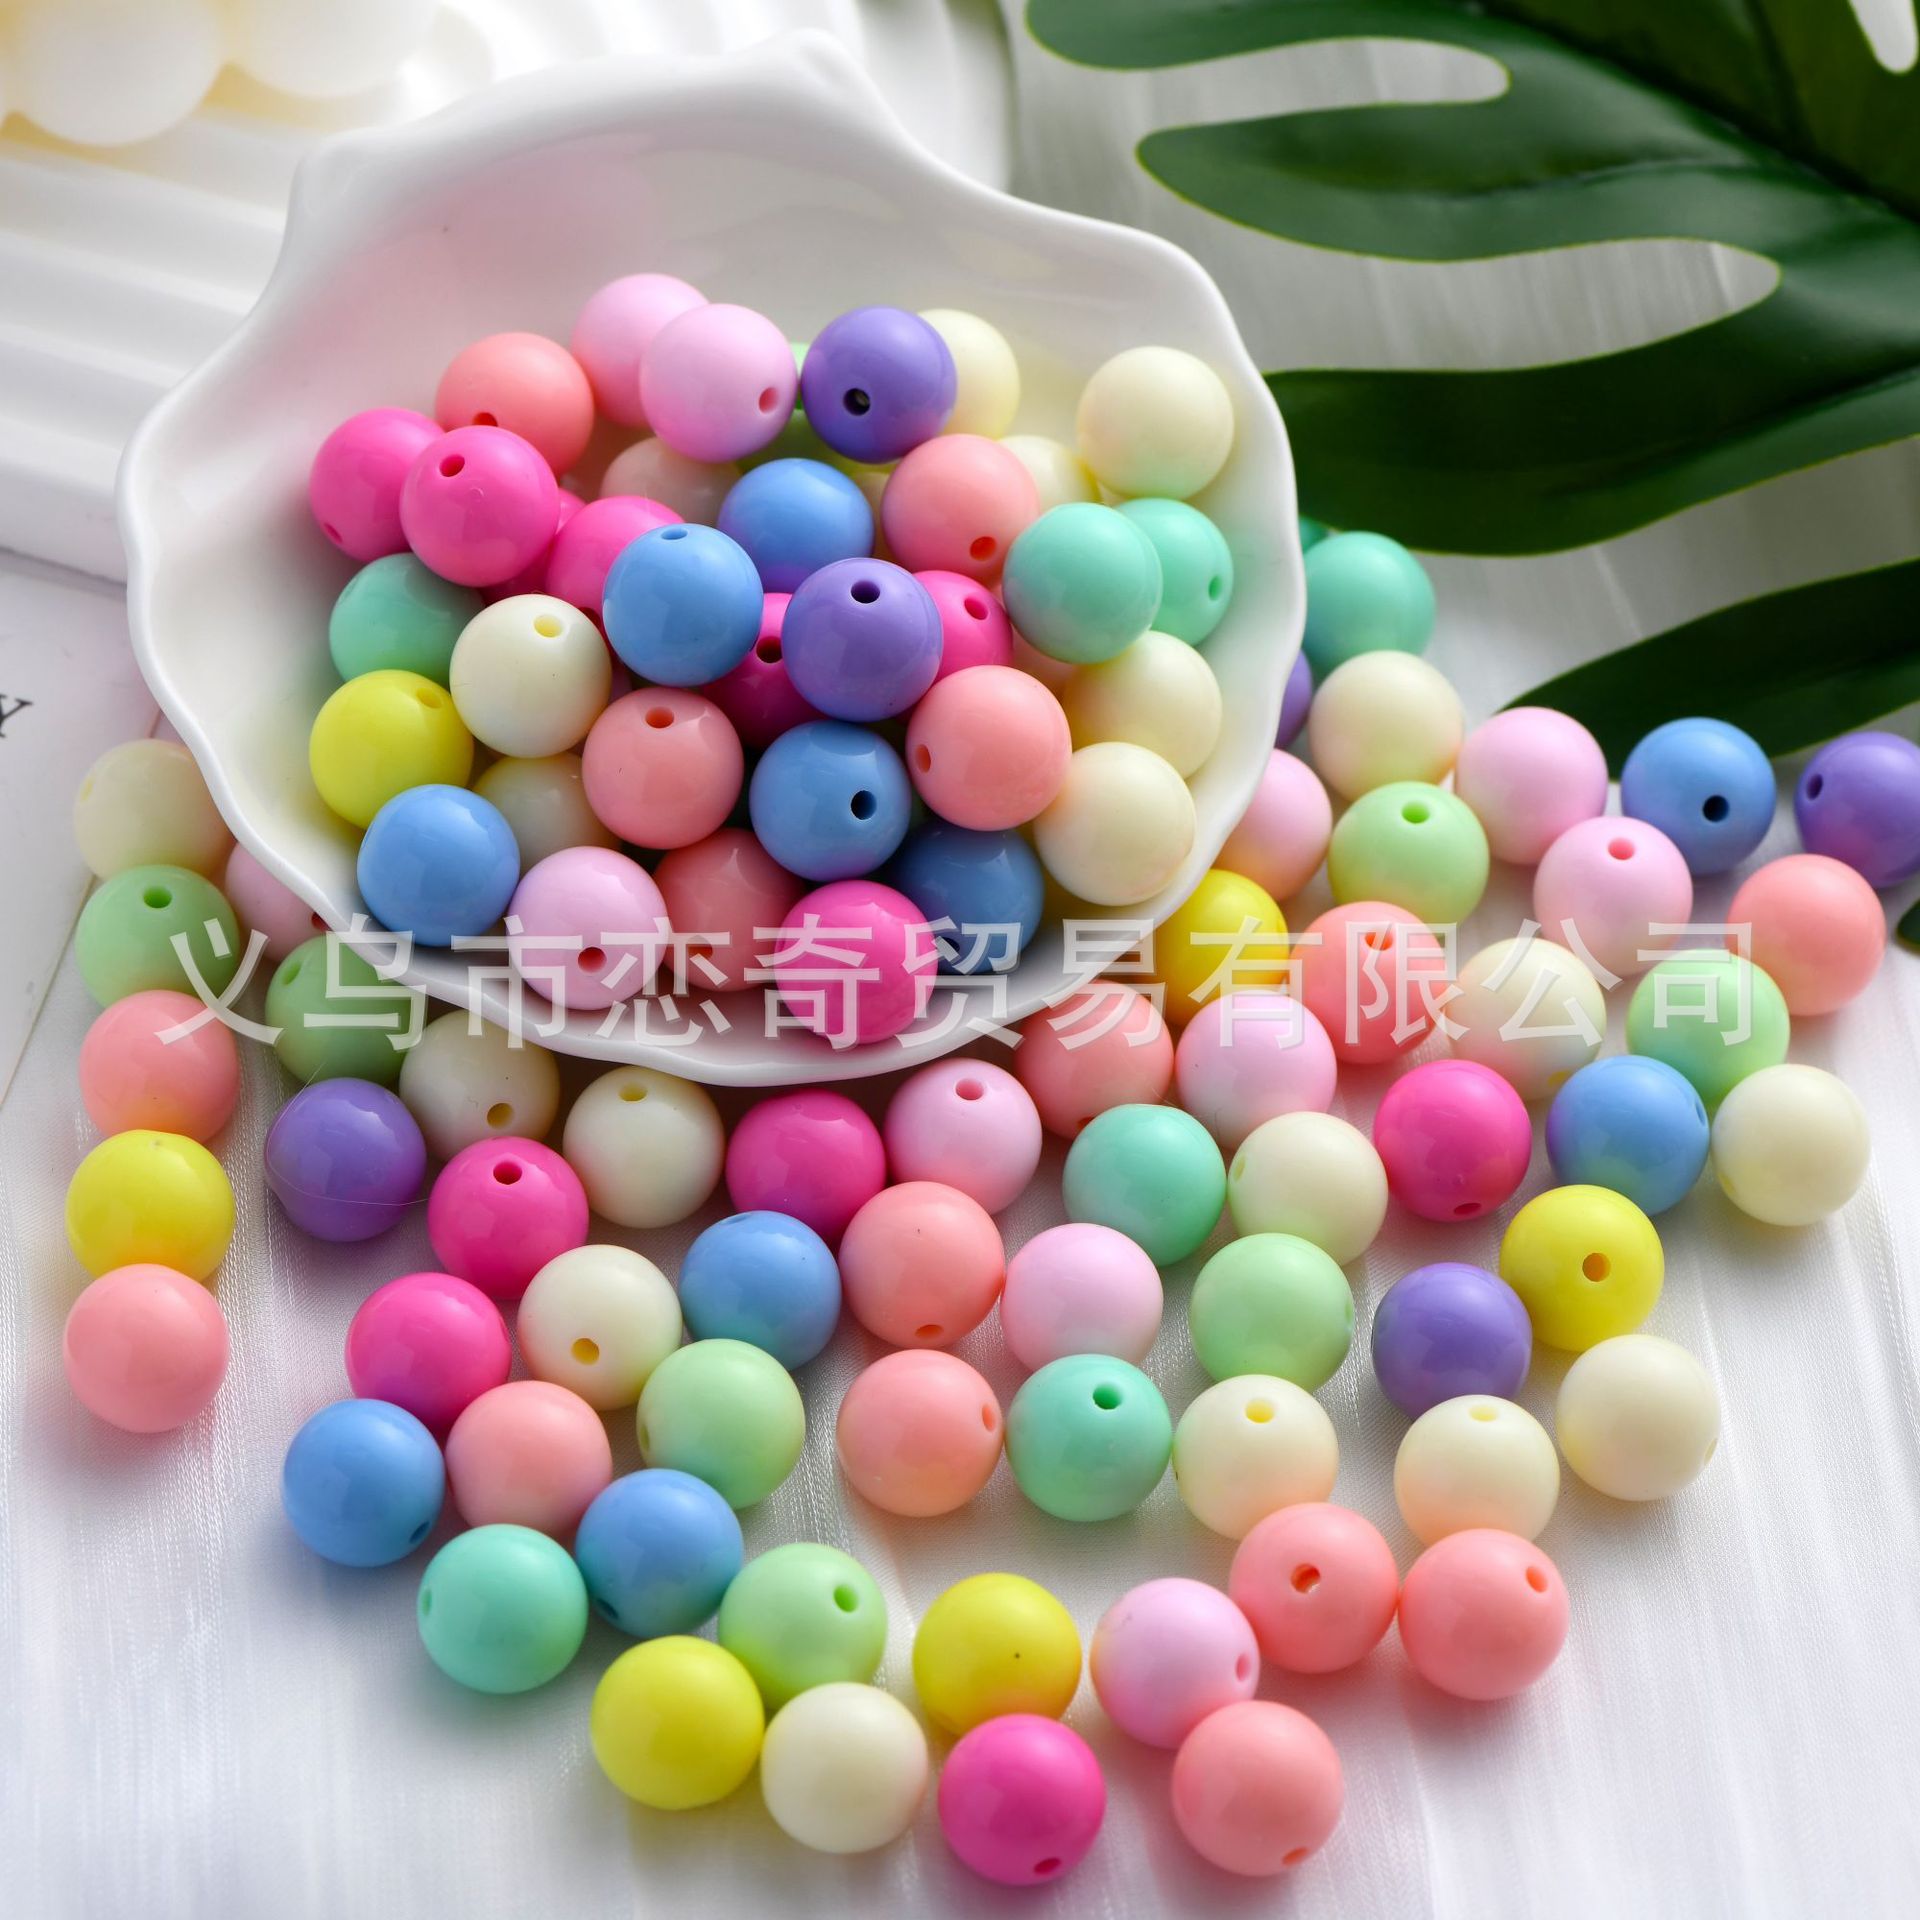 100 Pcs/Pack Acrylic round Beads Macarons Solid Color Beads DIY Handmade Beaded Candy Color Scattered Beads